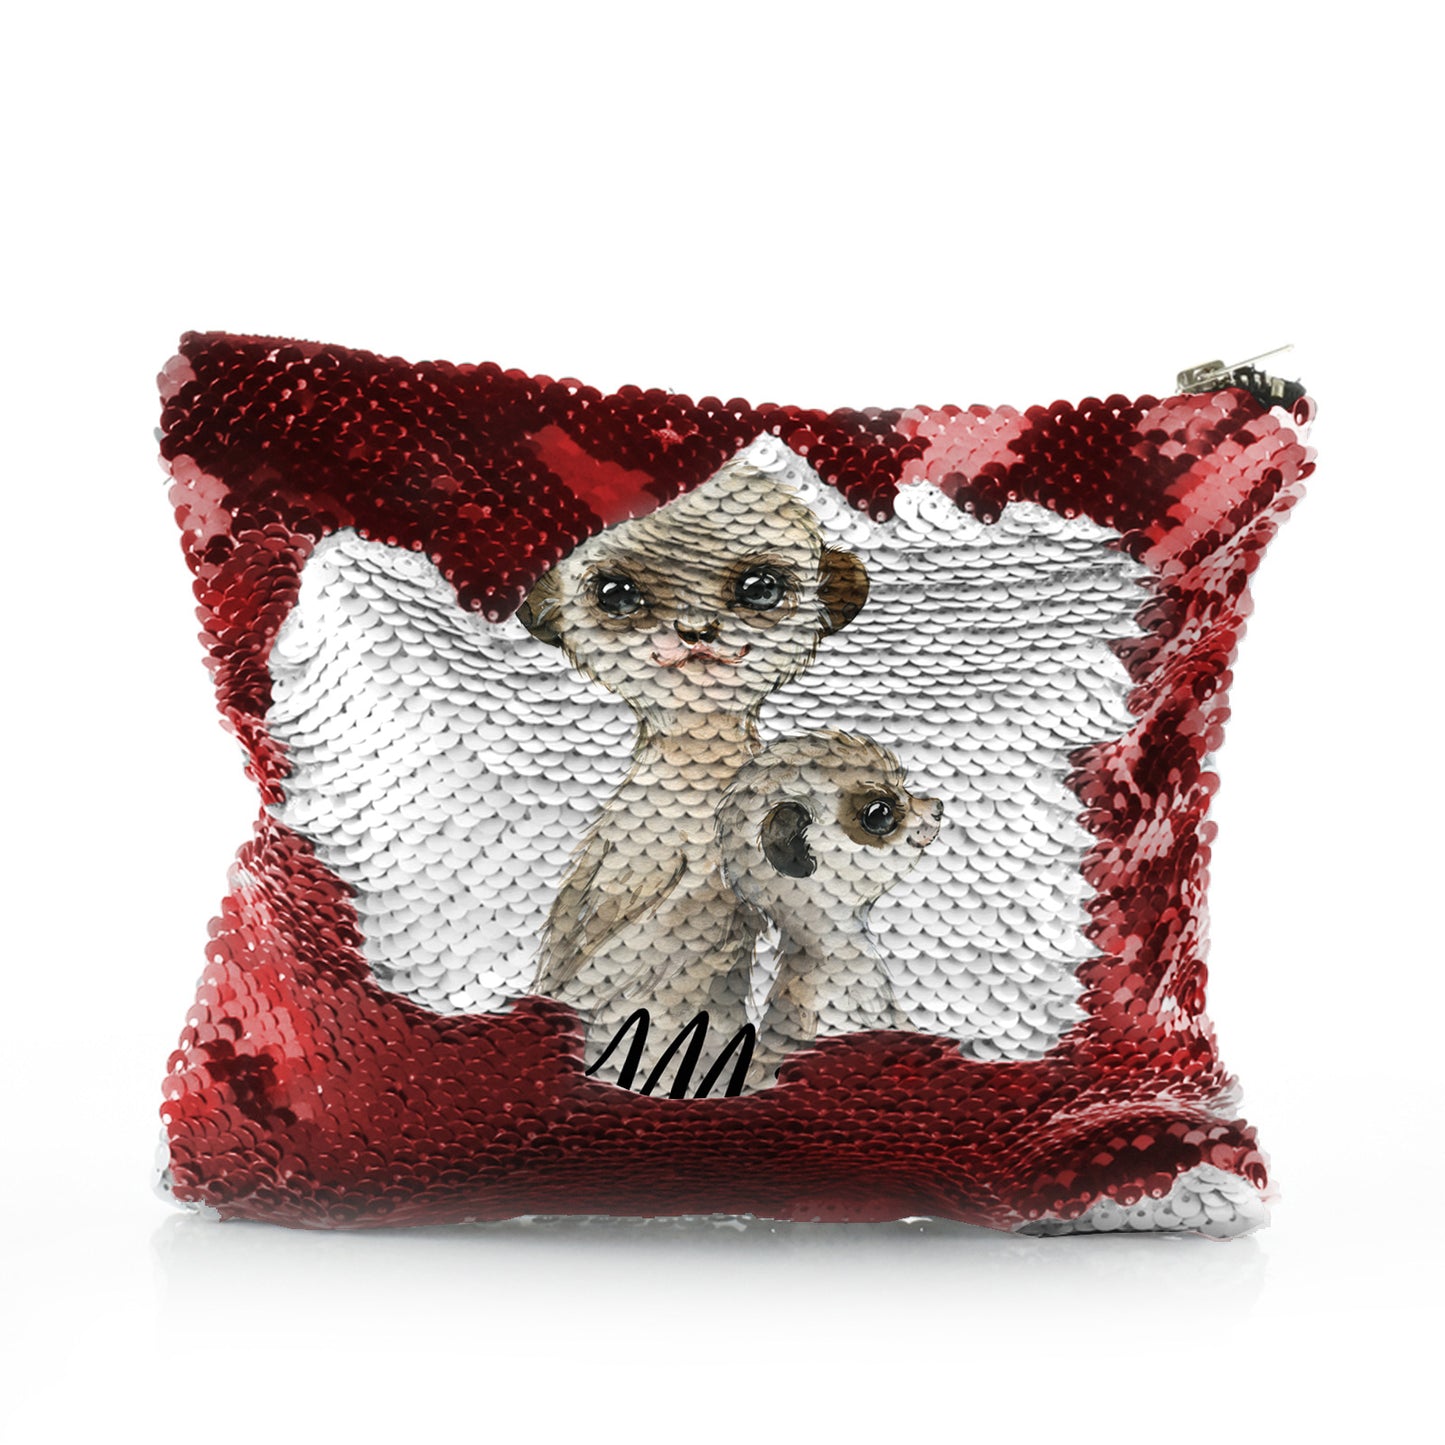 Personalised Sequin Zip Bag with Meerkat Baby and Adult and Cute Text